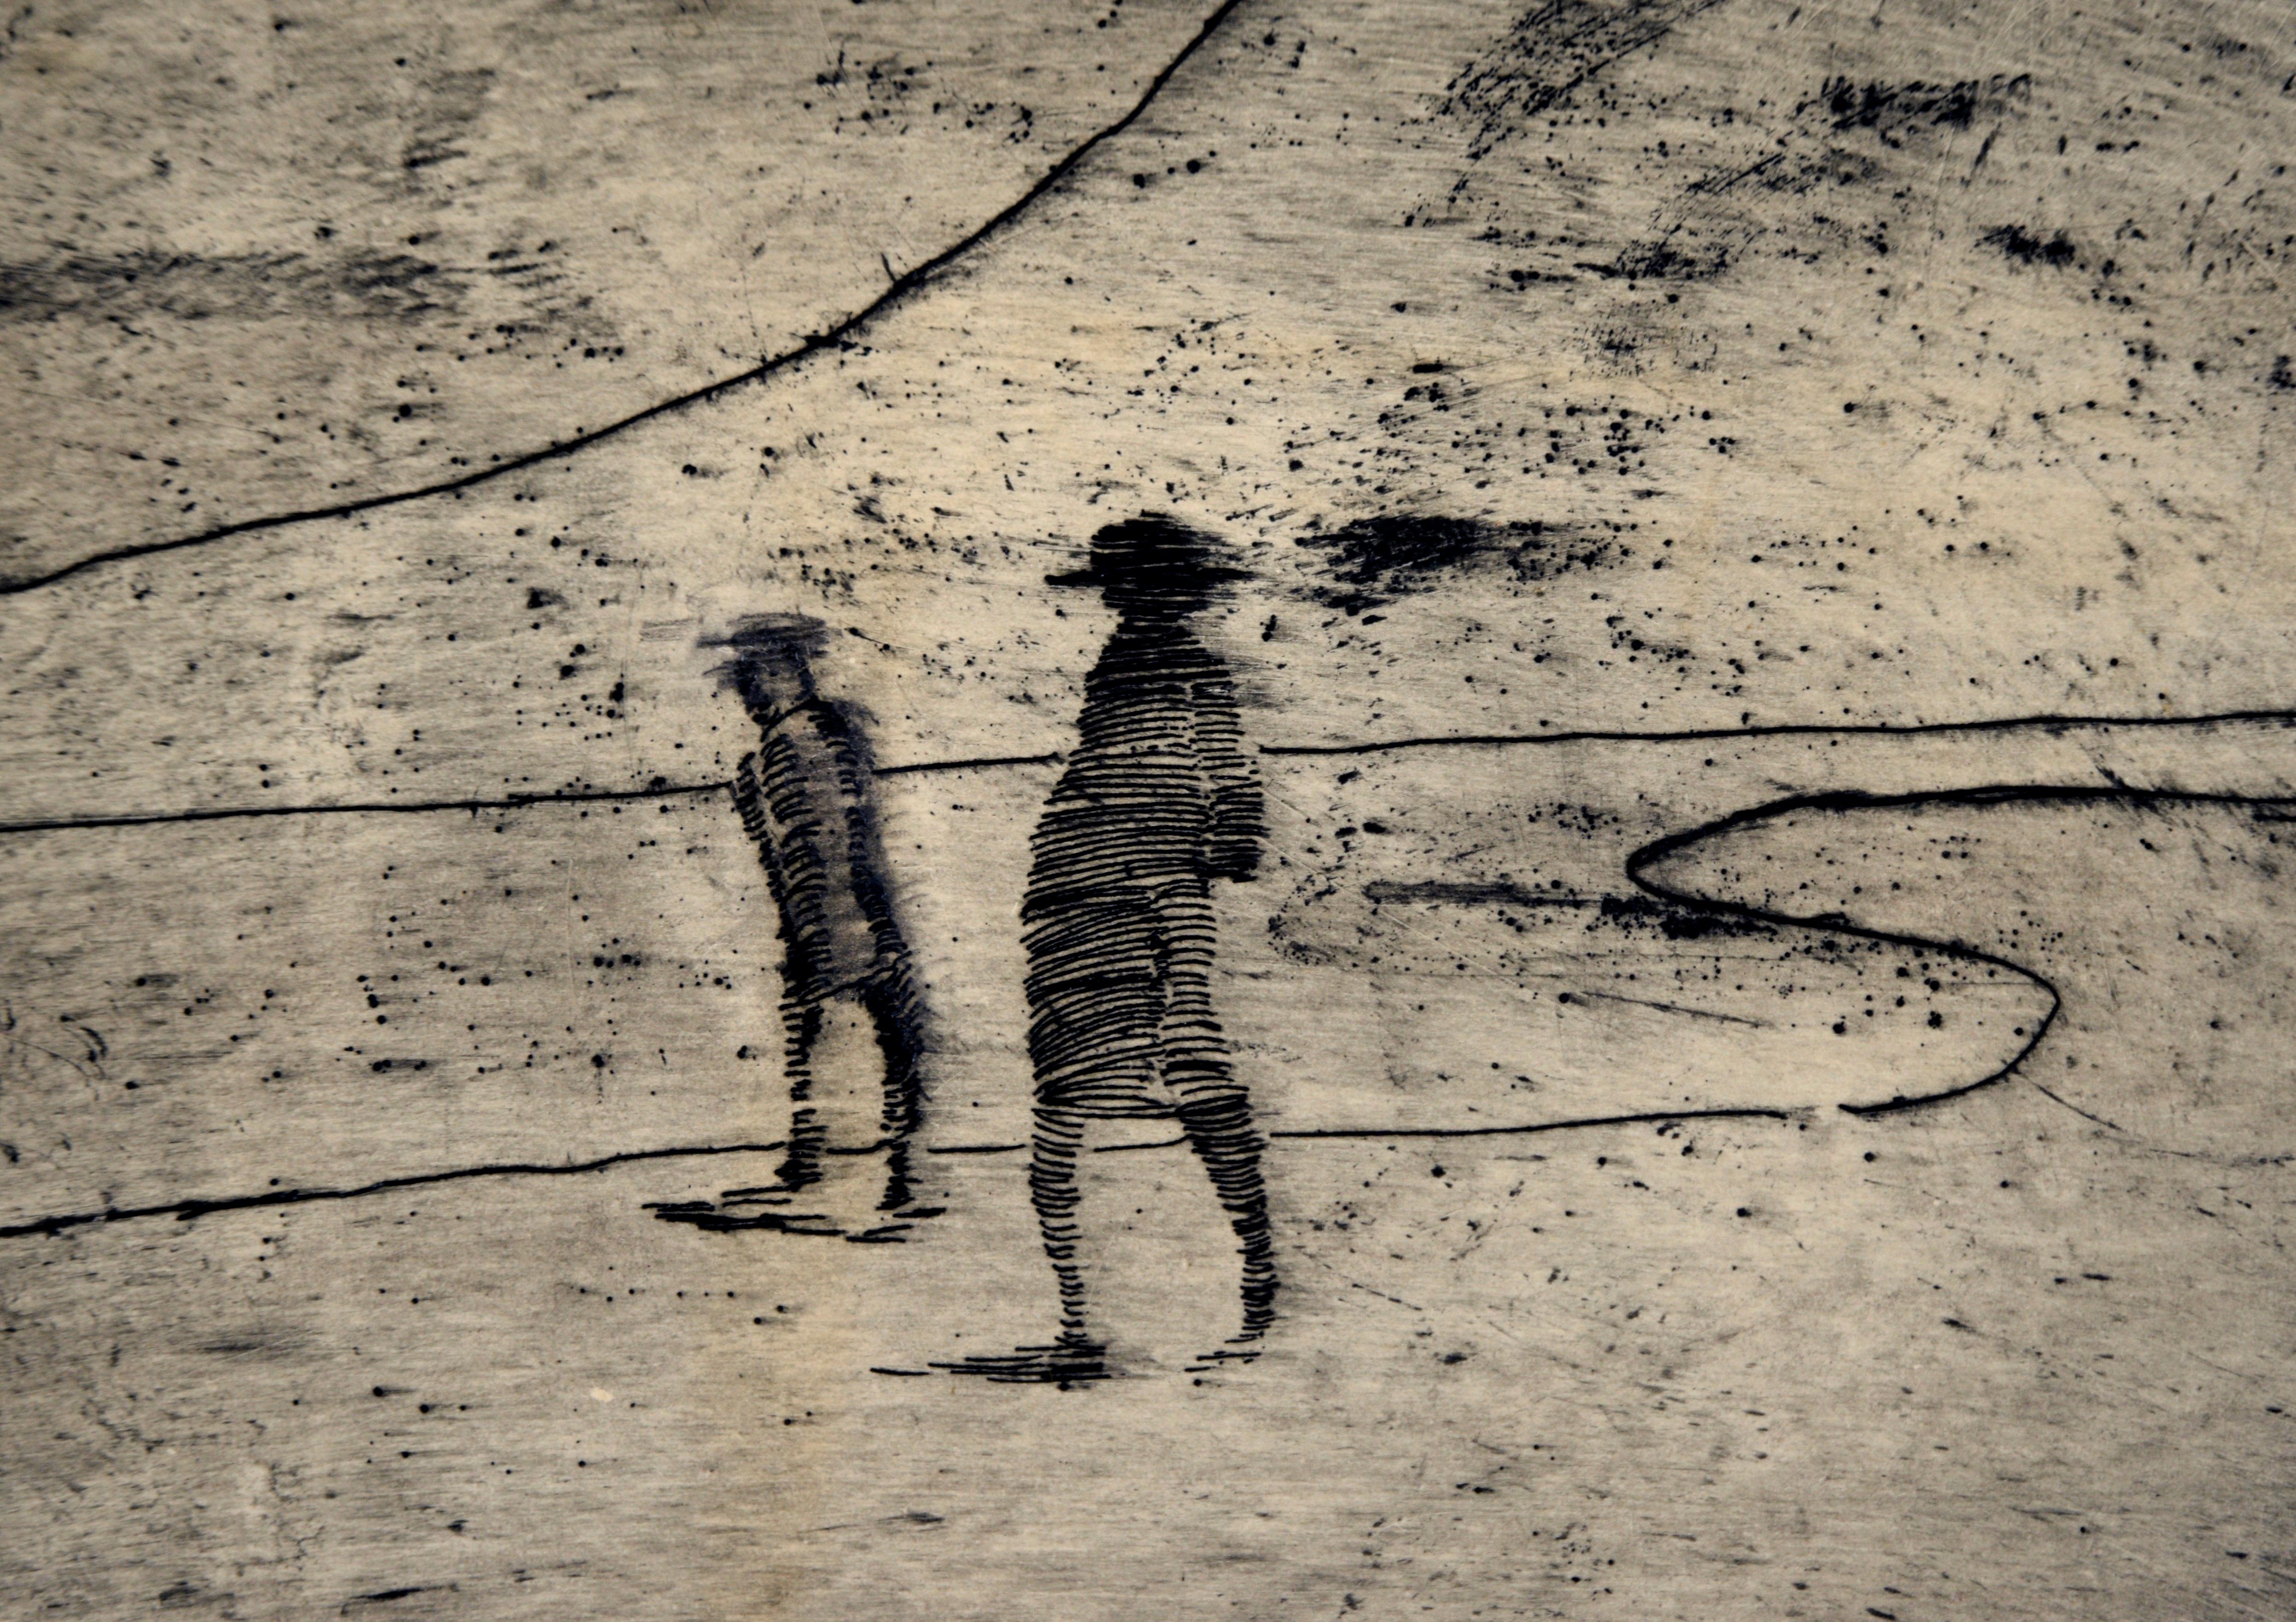 Two Figures on the Shore - Minimalist Landscape Drypoint Etching in Ink on Paper - Brown Landscape Print by Doris Warner